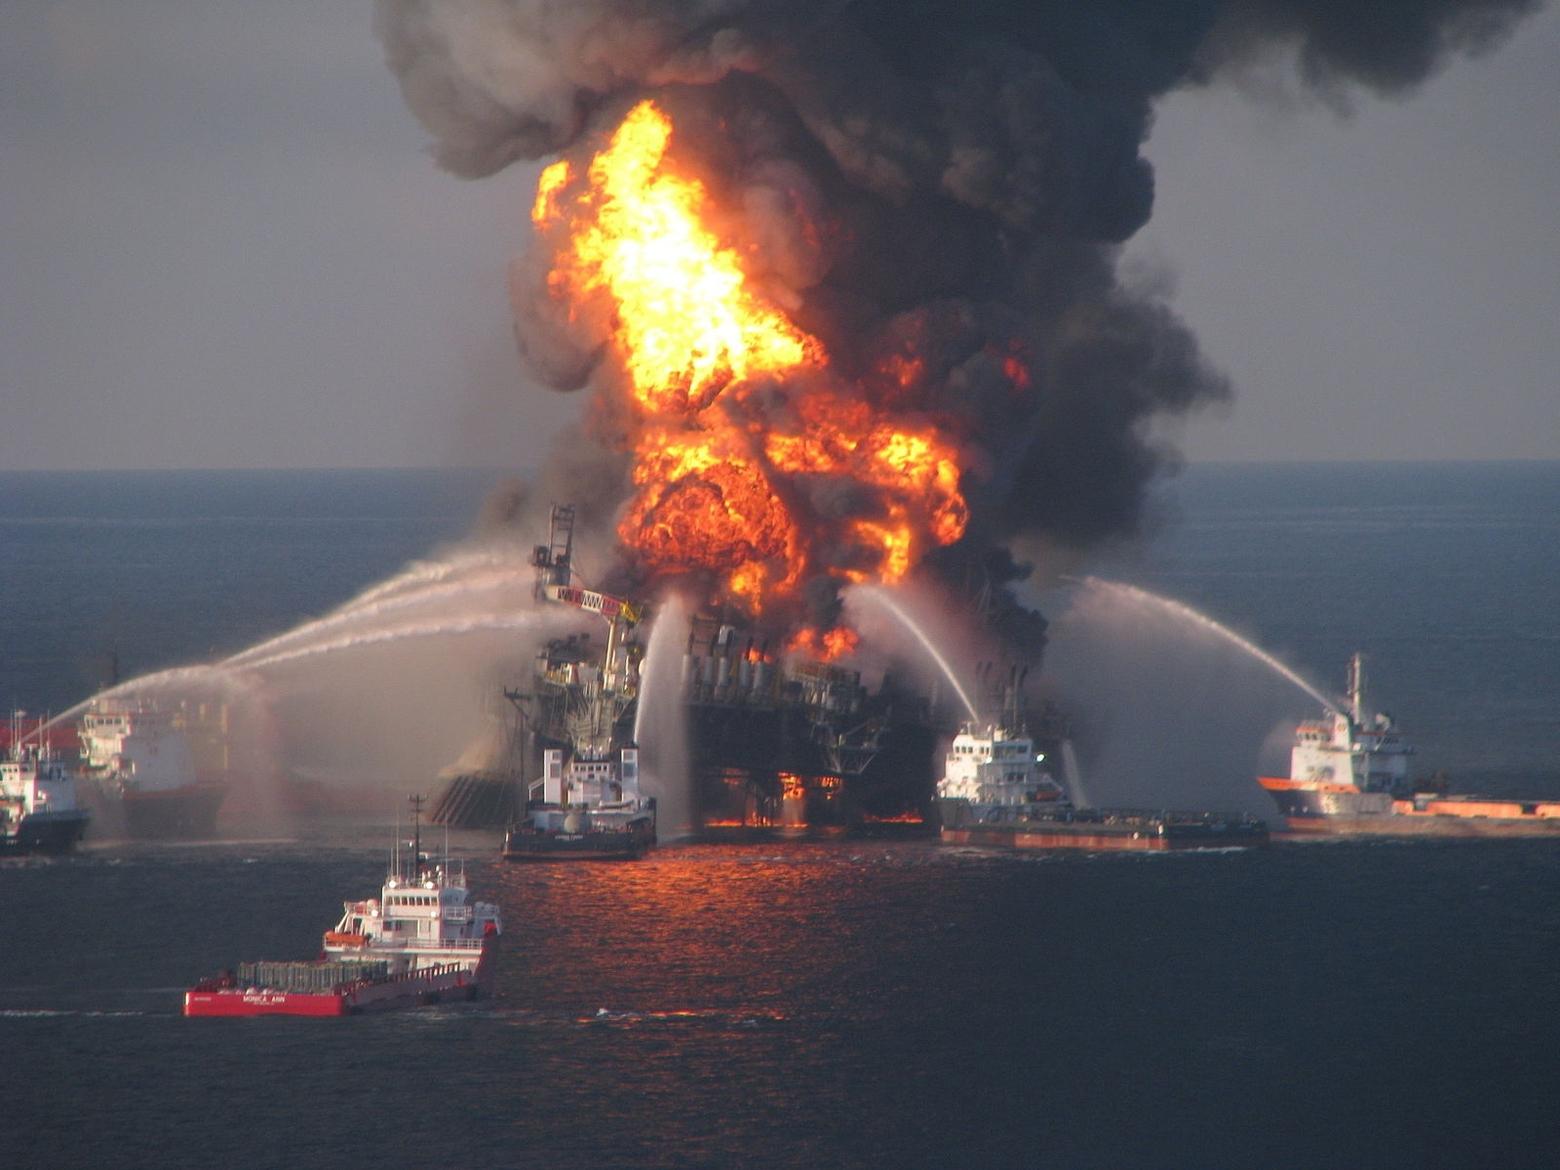 BP's Deepwater Horizon drilling platform disaster which started on April 10, 2010 and leaked  3.19 million barrels of oil into the Gulf of Mexico across 87 days, causing $62 billion in damages and clean-up costs. It is by far the worst oil spill in U.S. history. NEPA is a law intended to protect the public interest against such disasters. Photo courtesy NOAA